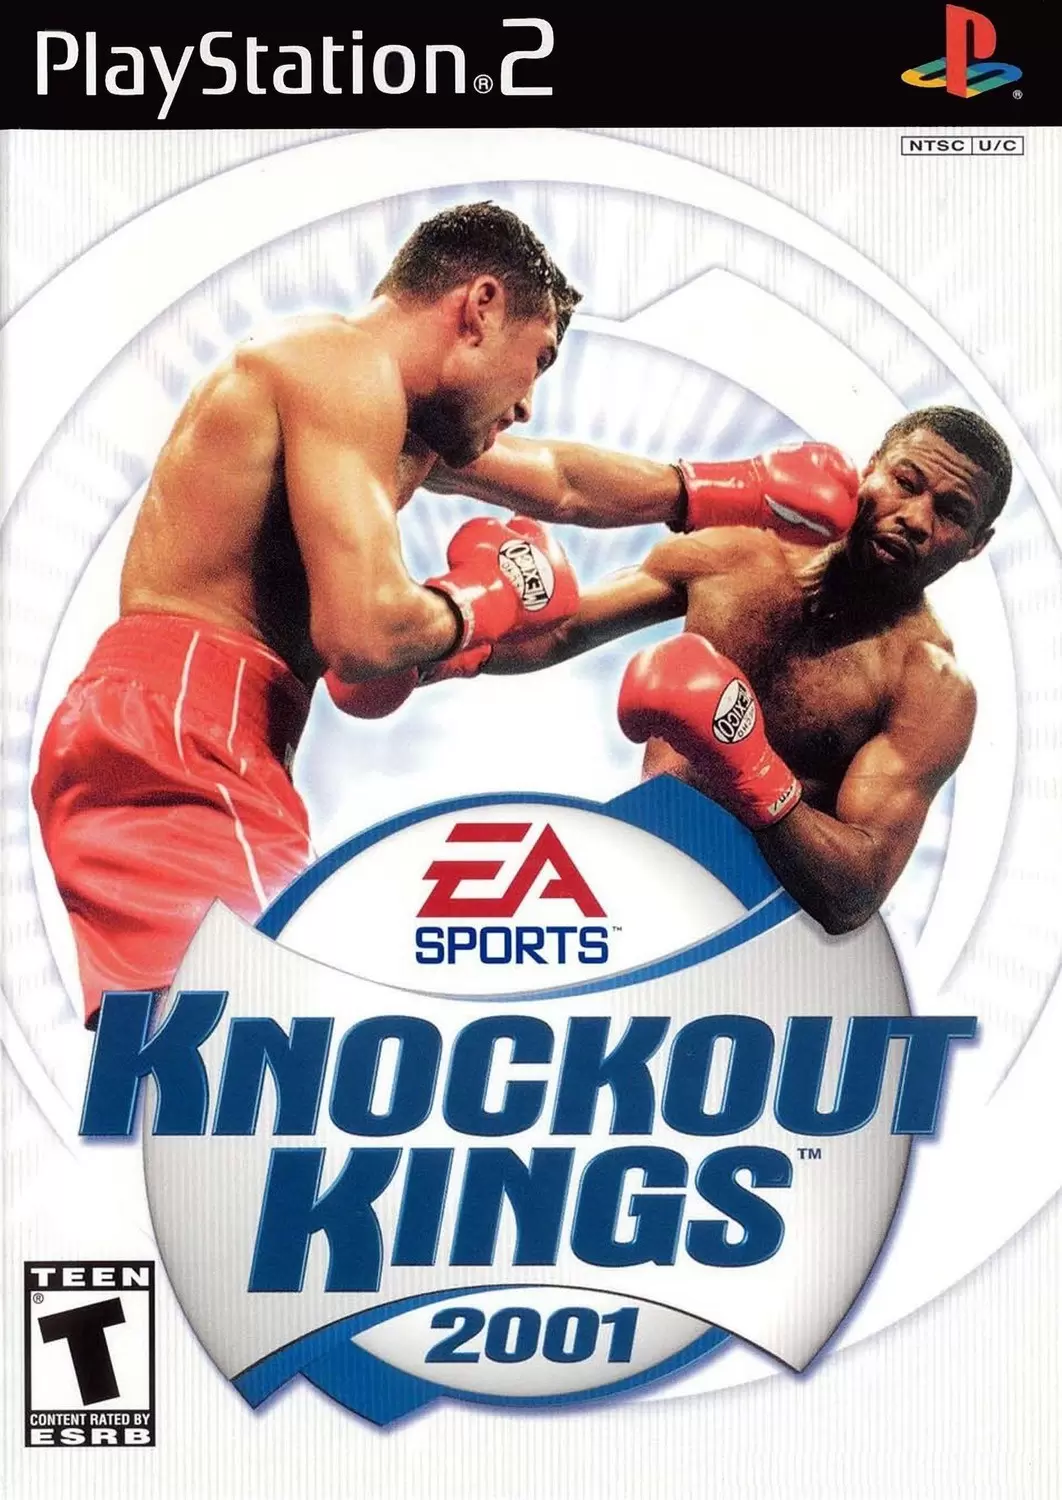 PS2 Games - Knockout Kings 2001